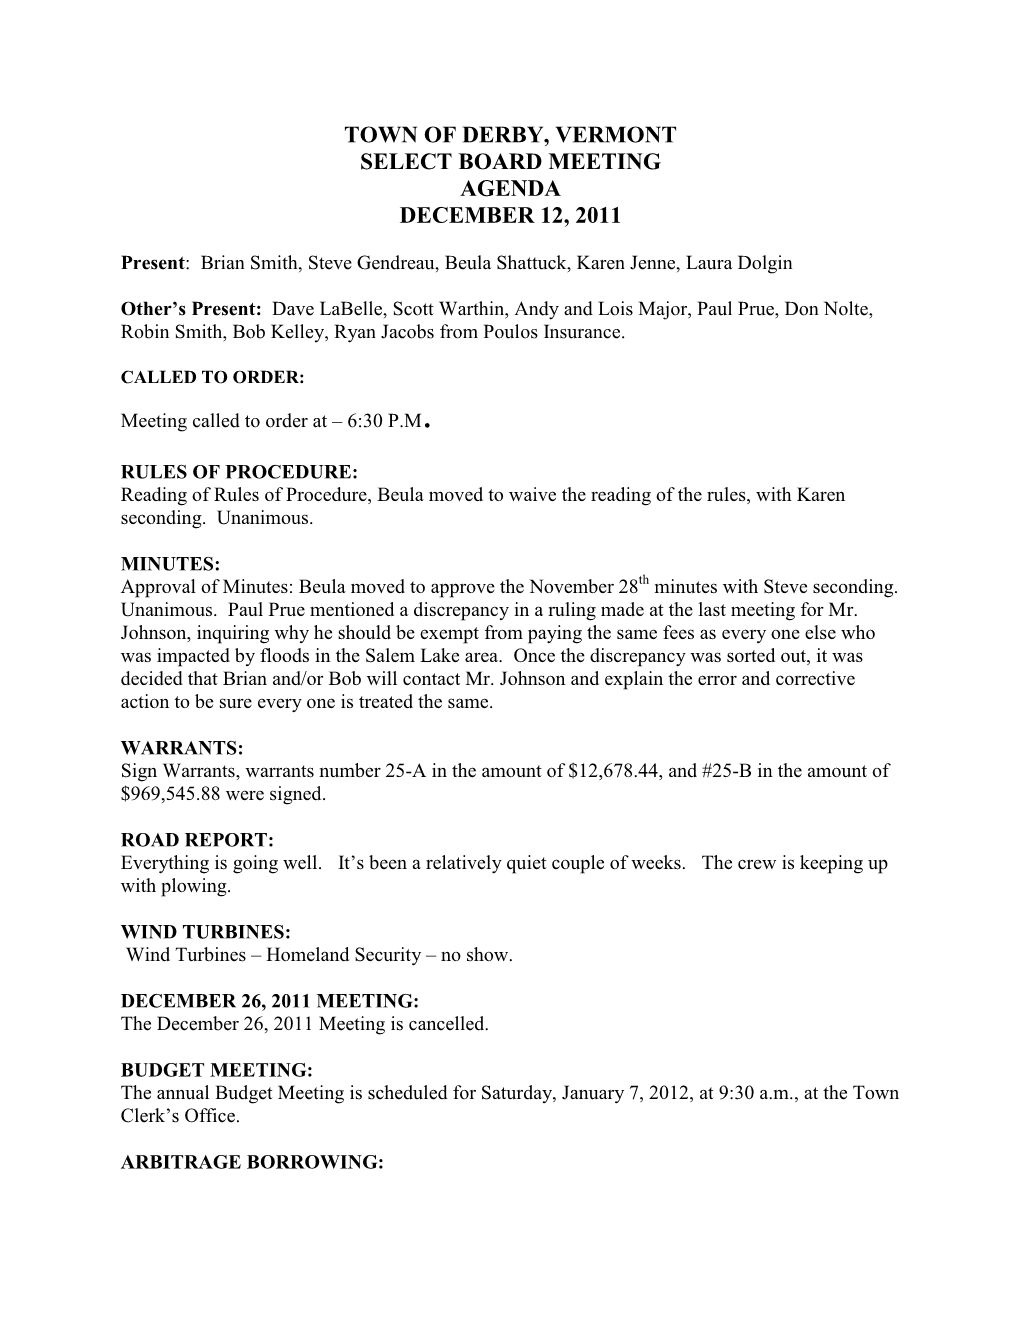 Town of Derby, Vermont Select Board Meeting Agenda December 12, 2011